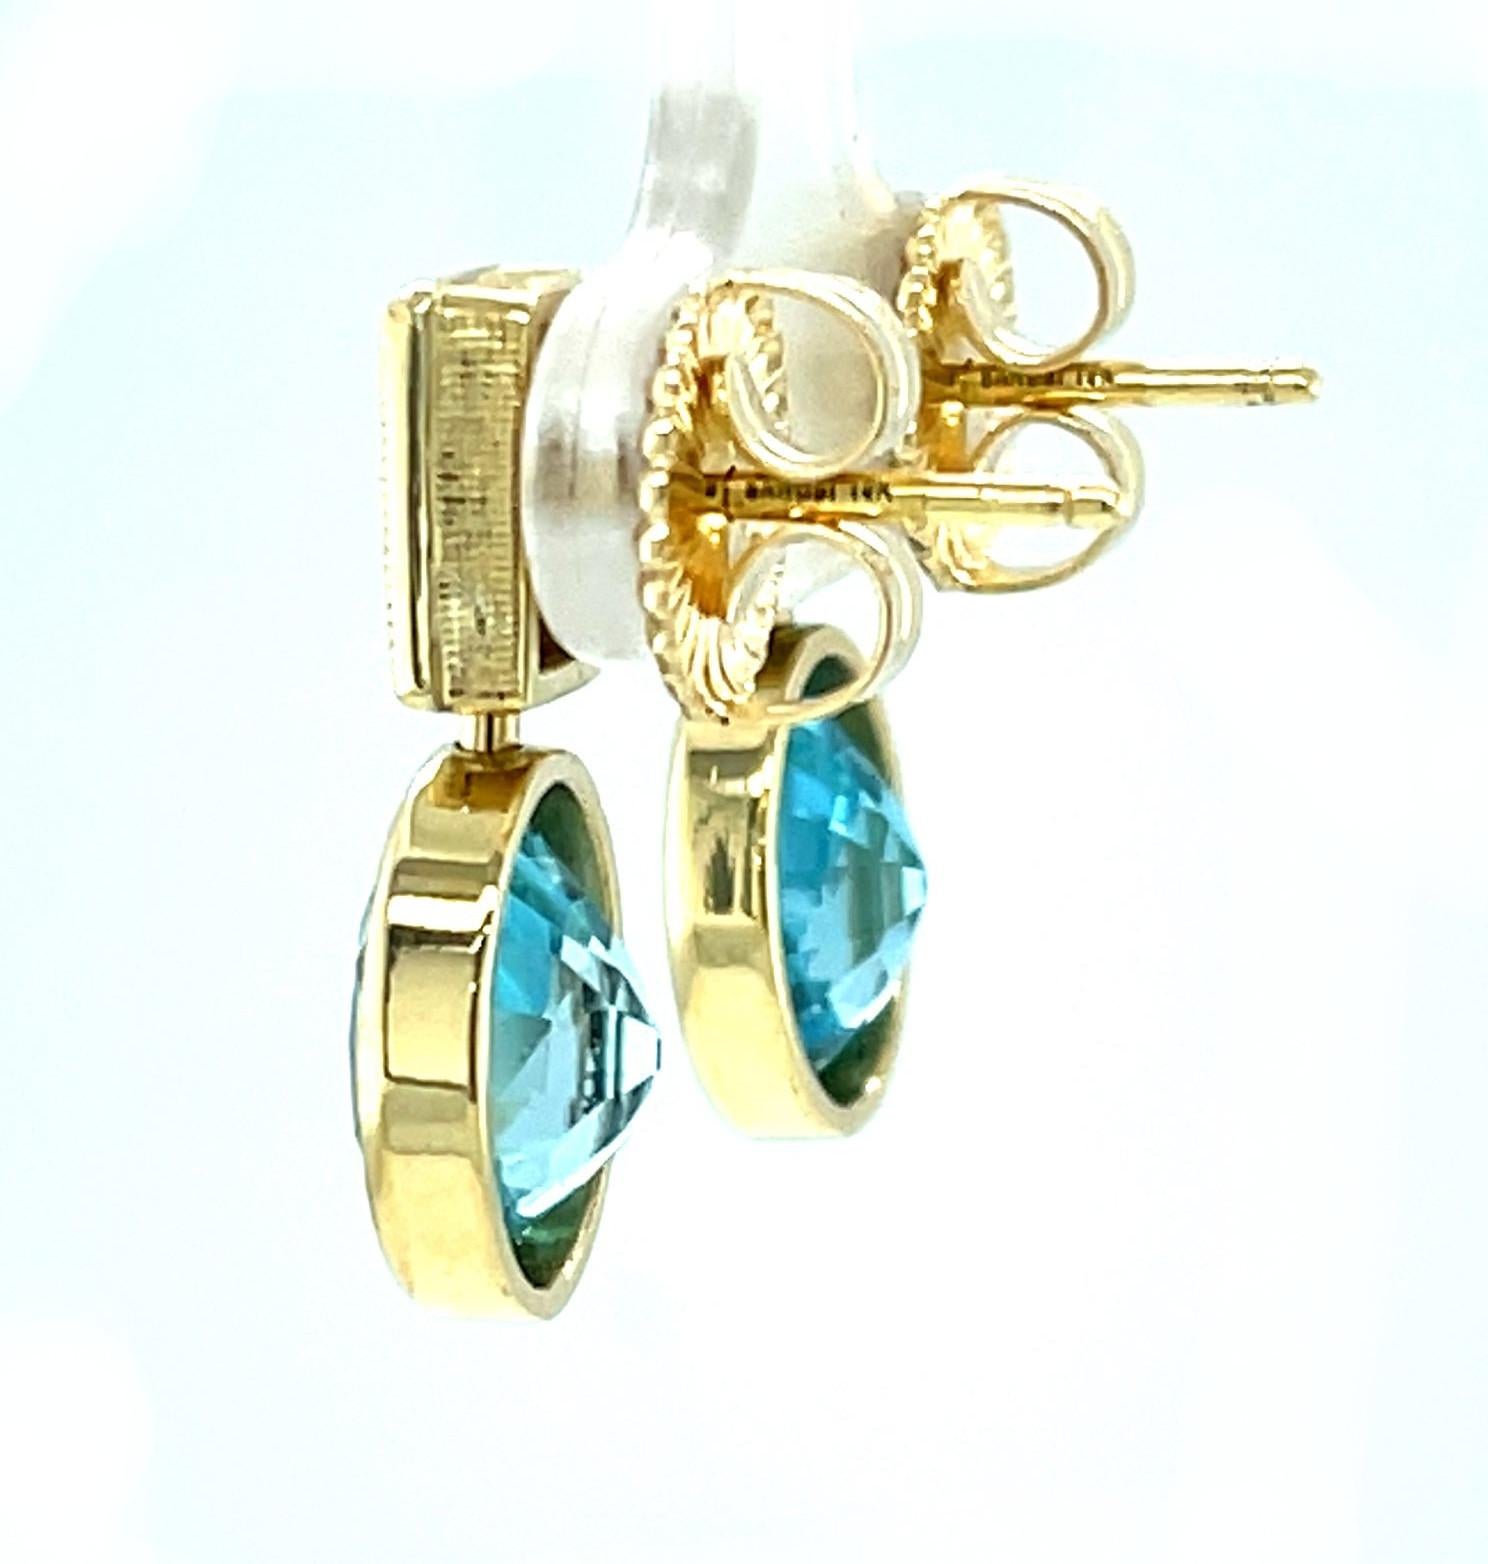 Blue Zircon and Diamond Drop Earrings in Yellow Gold, 9.38 Carats Total In New Condition For Sale In Los Angeles, CA